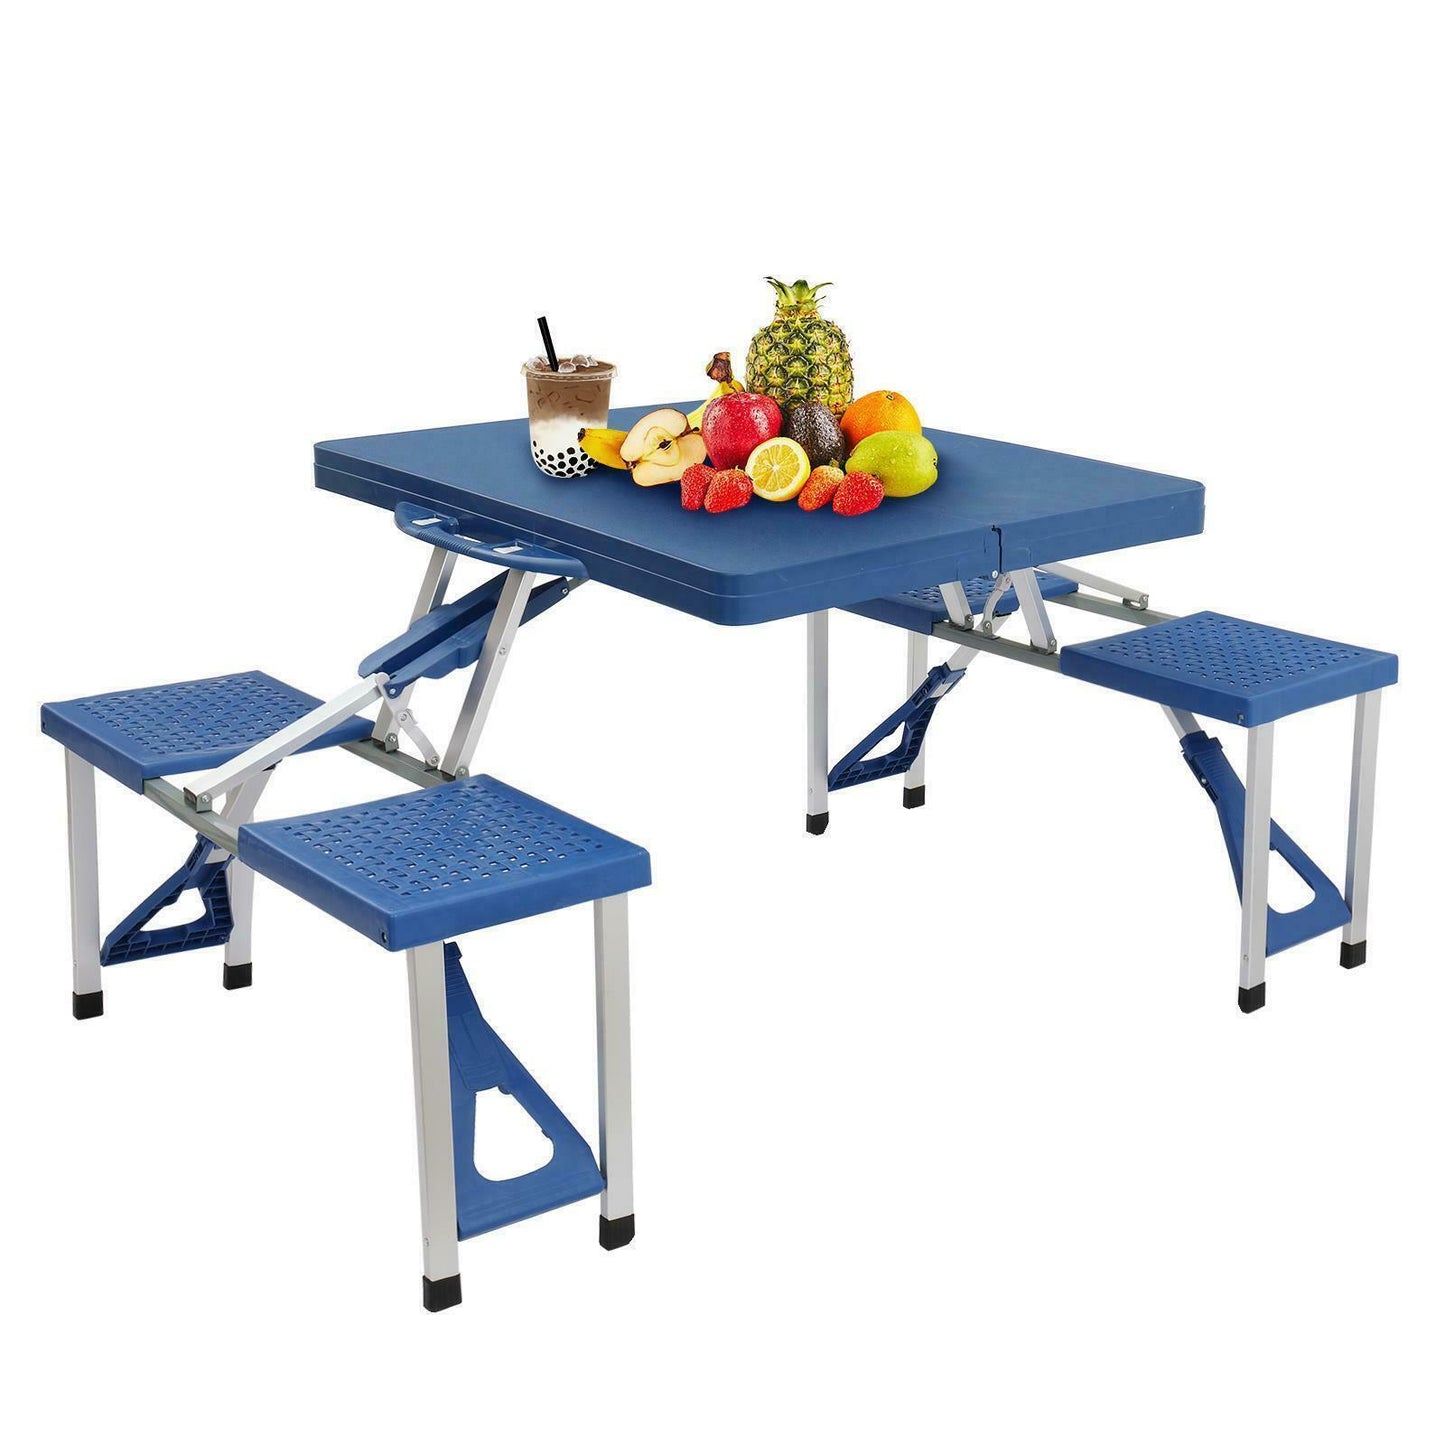 Folding Tables - Folding Picnic Table - Portable Set with Seats for Outdoors & Camping -